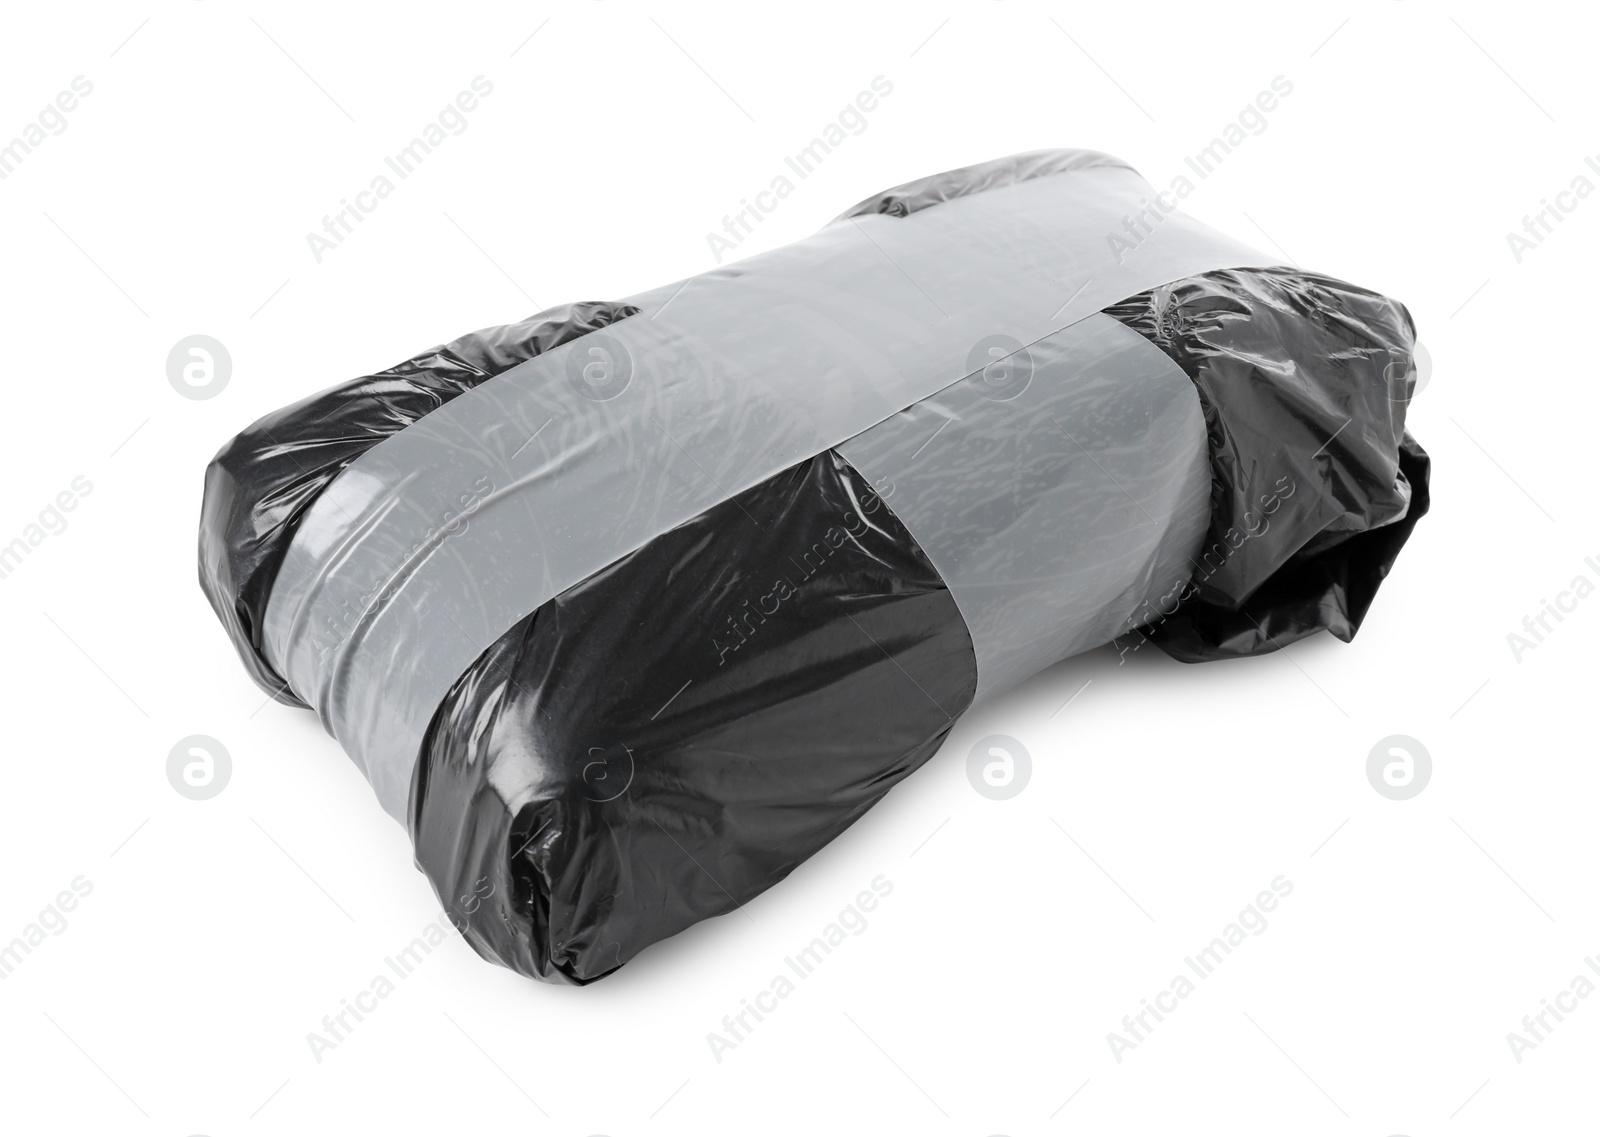 Photo of Package with narcotics isolated on white. Drug addiction